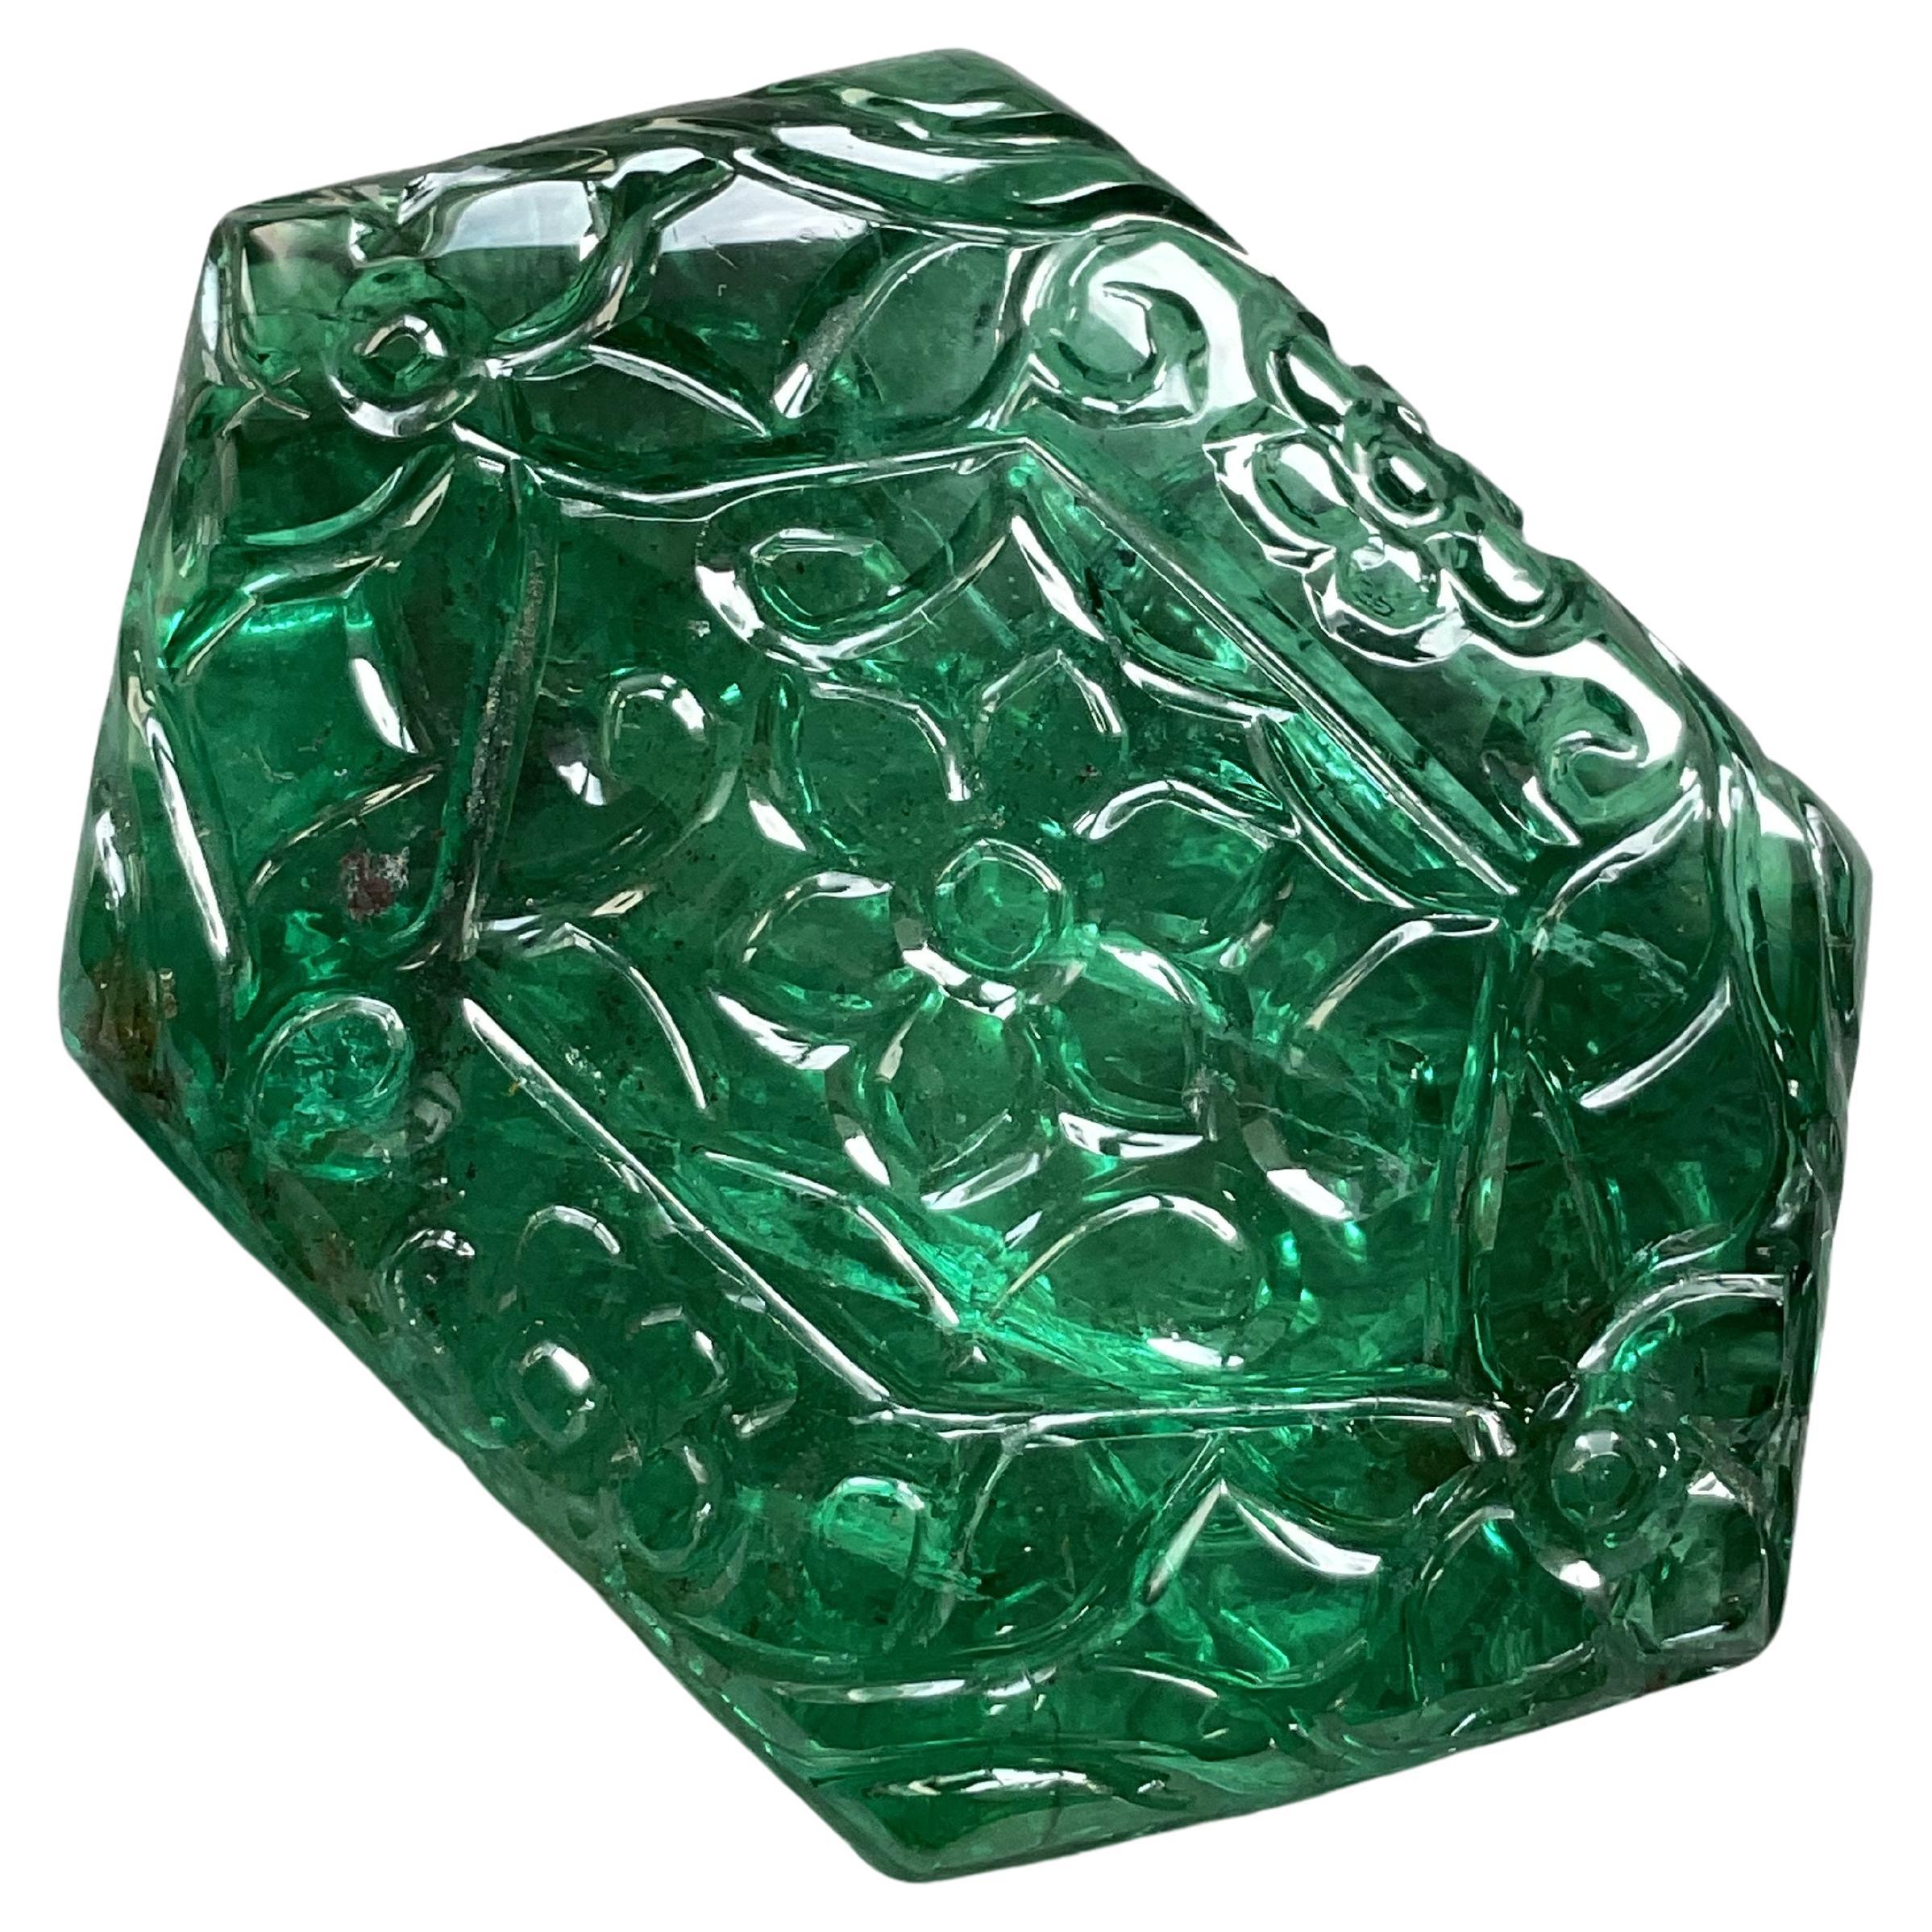 Zambian Emerald Hexagon Carved Gem Quality High Jewelry Gemstone 83.3 Carats For Sale